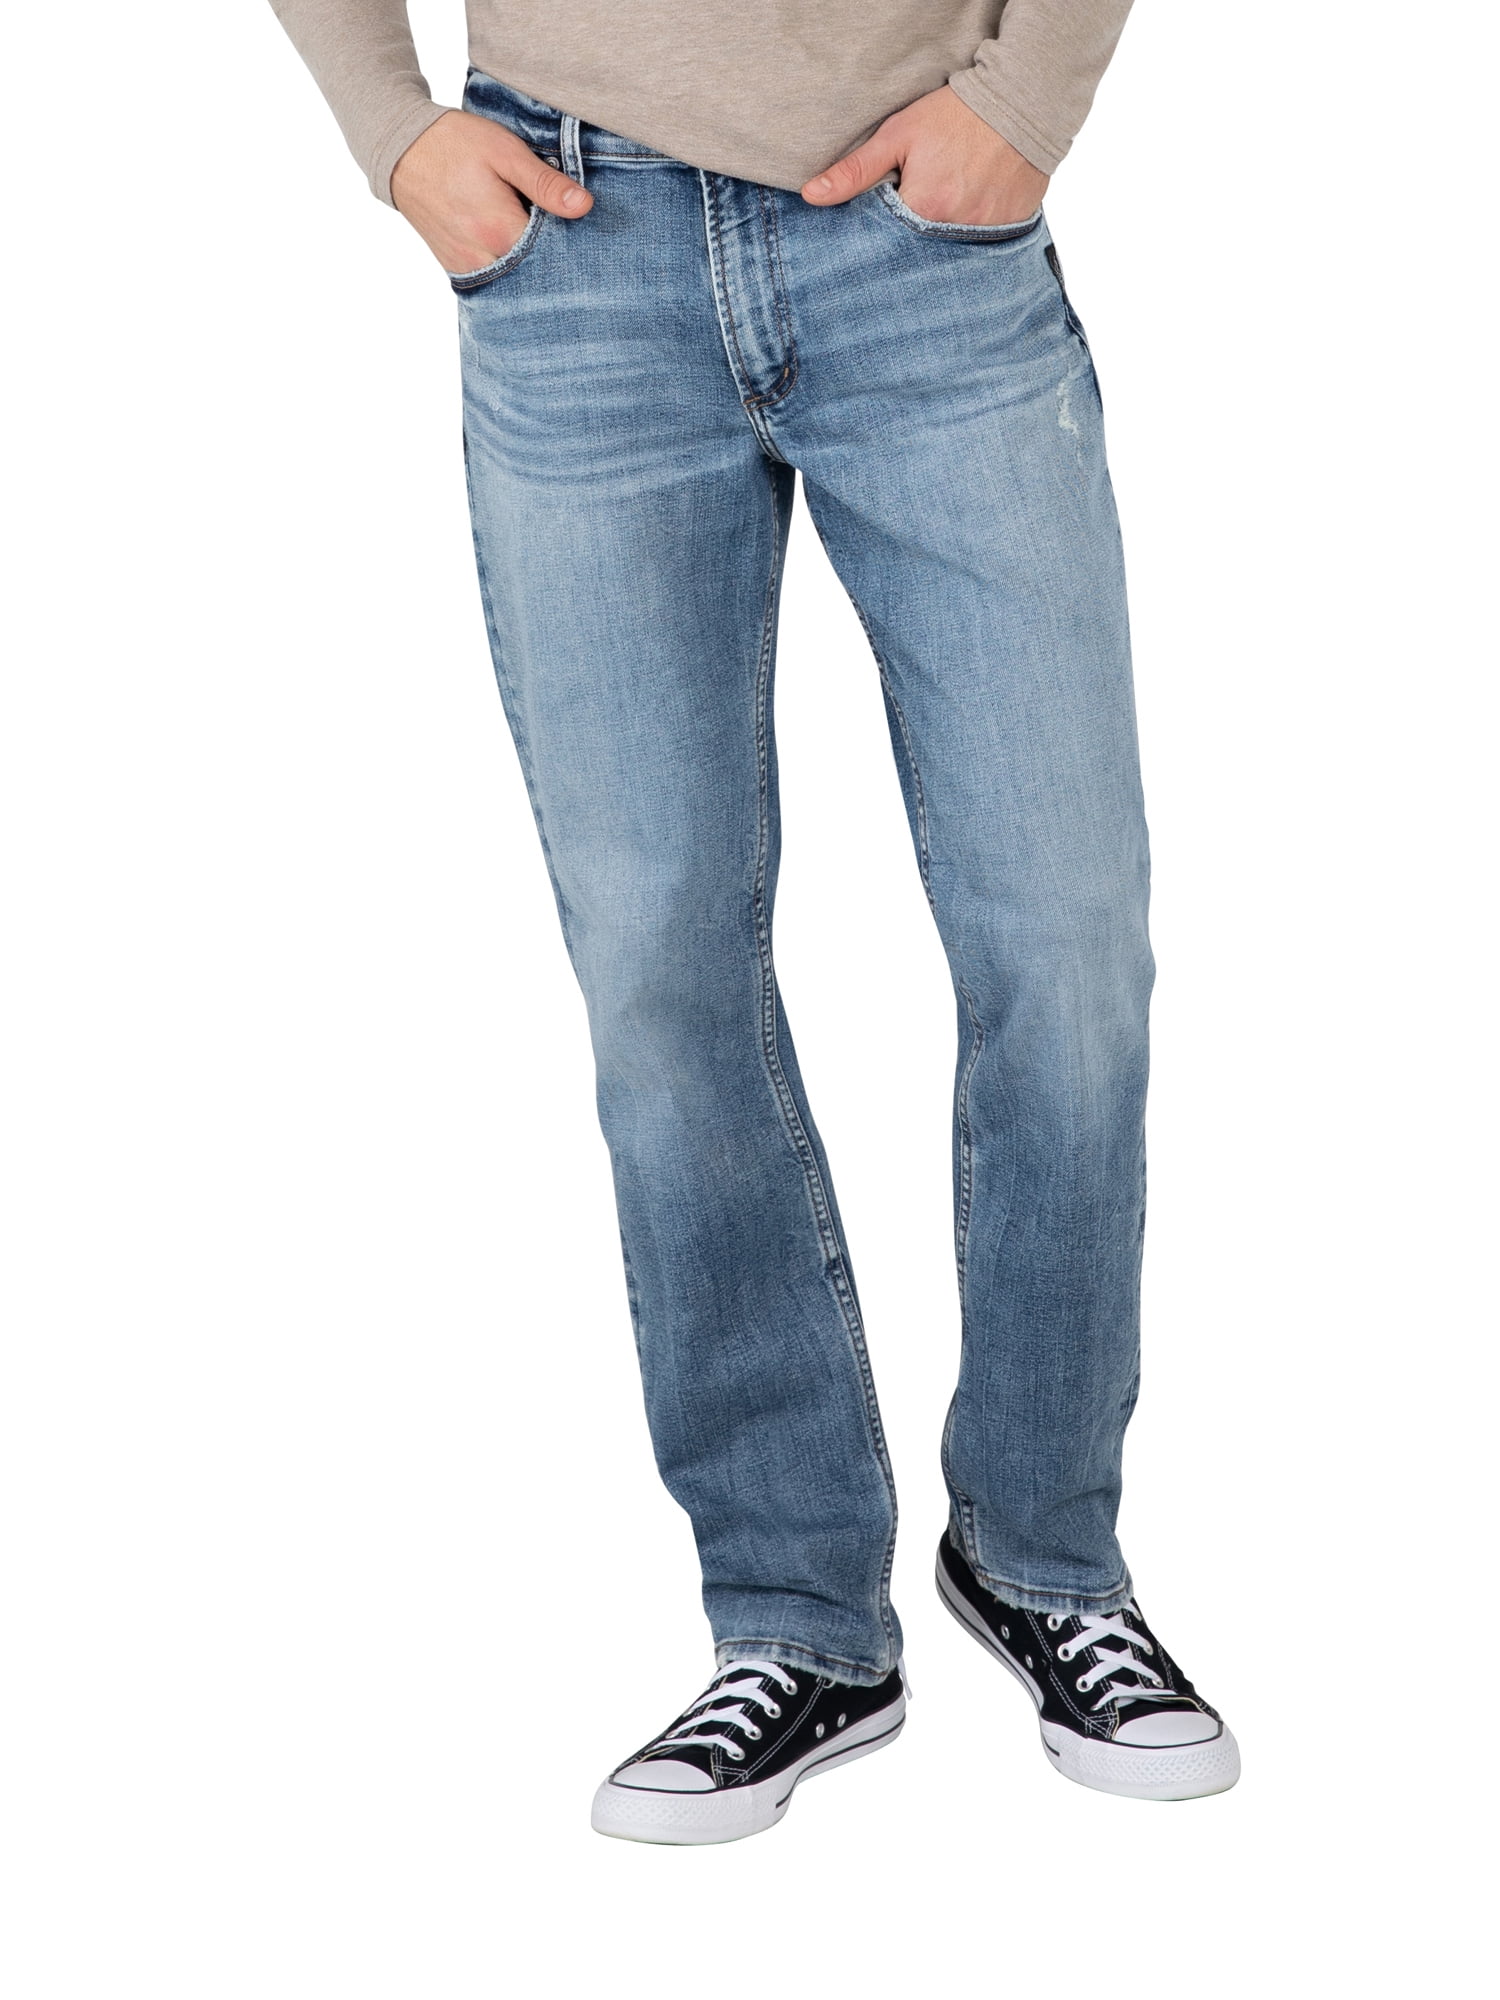 Silver Jeans Co Mens Machray Straight Leg Jeans 